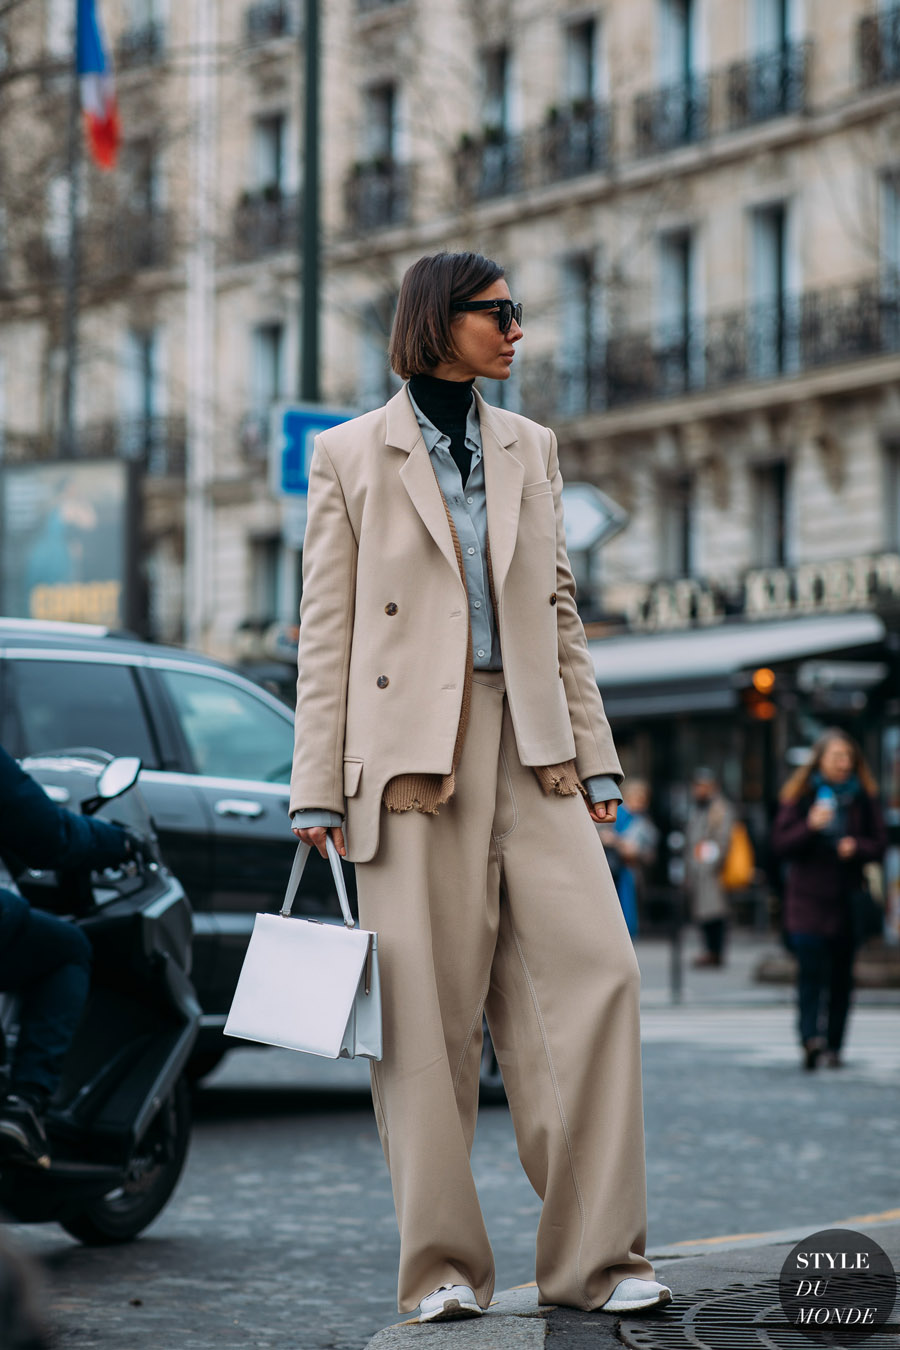 Julie-Pelipas-by-STYLEDUMONDE-Street-Style-Fashion-Photography-FW18-20180303_48A9651